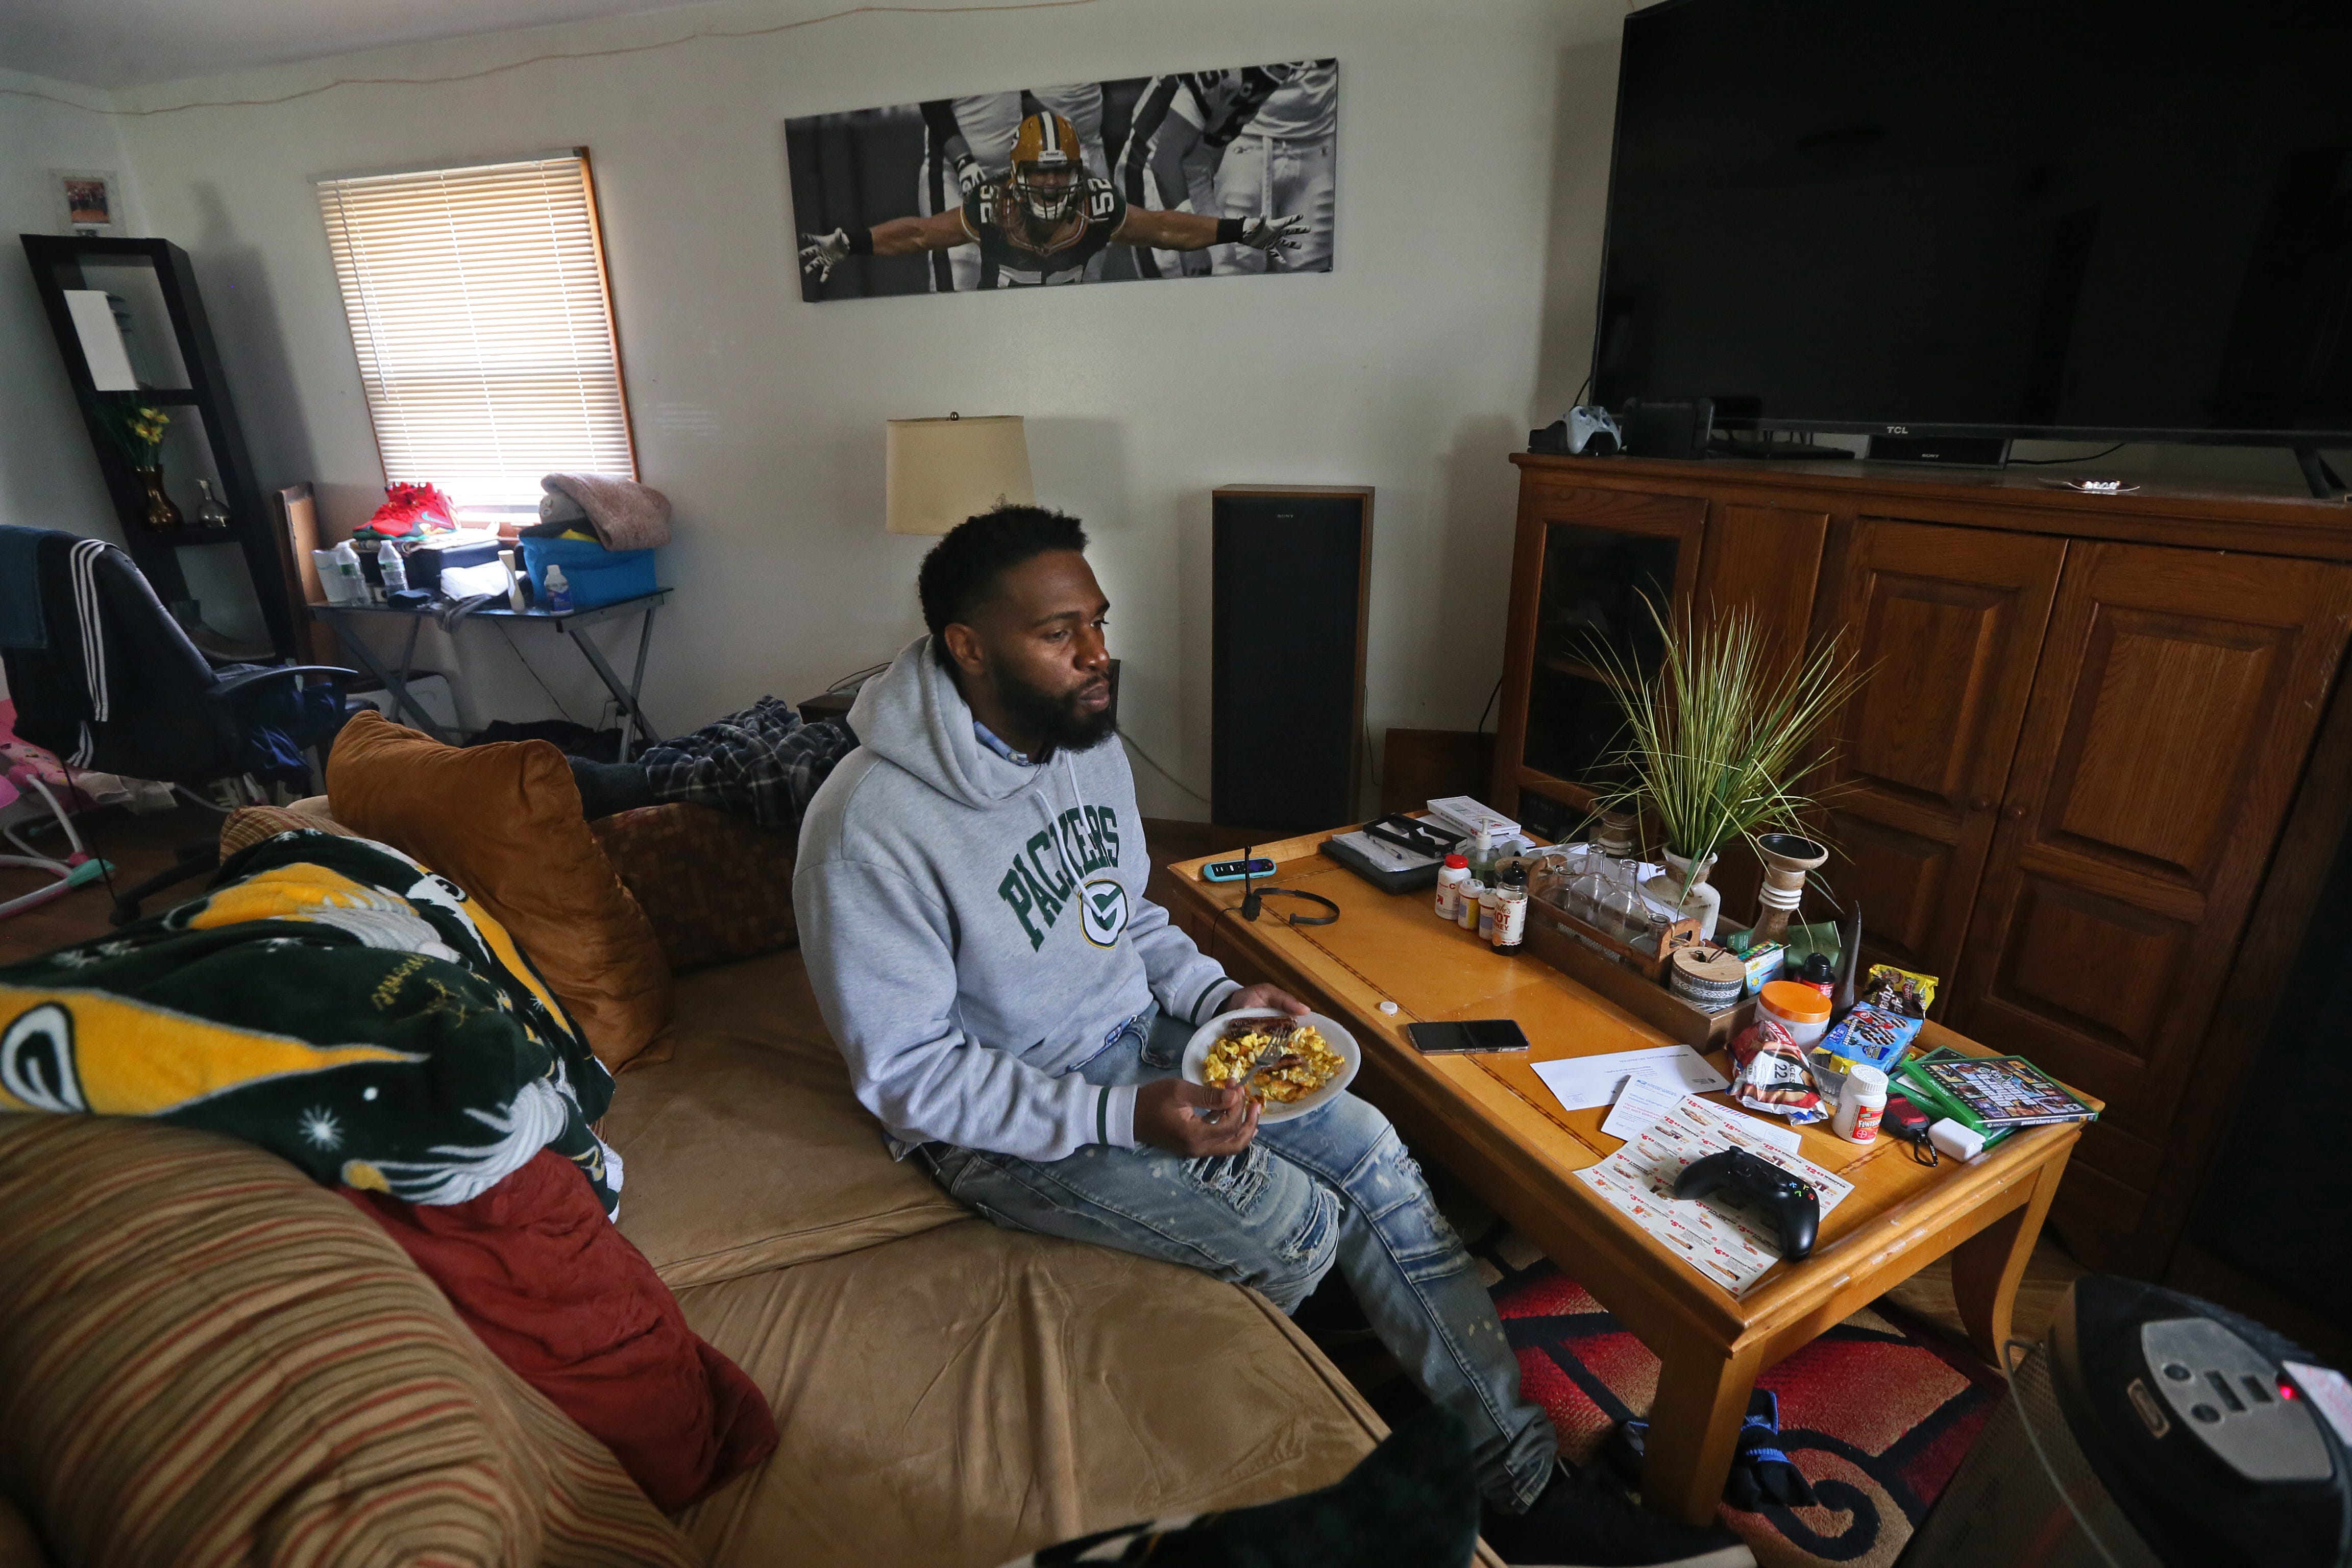 Marlin Dixon has breakfast at his brother’s home, where he moved after being released from Froedtert Hospital. The sofa also serves as his bed. “Even though I am facing homelessness, I have an opportunity to see what I am made of now,” he said.